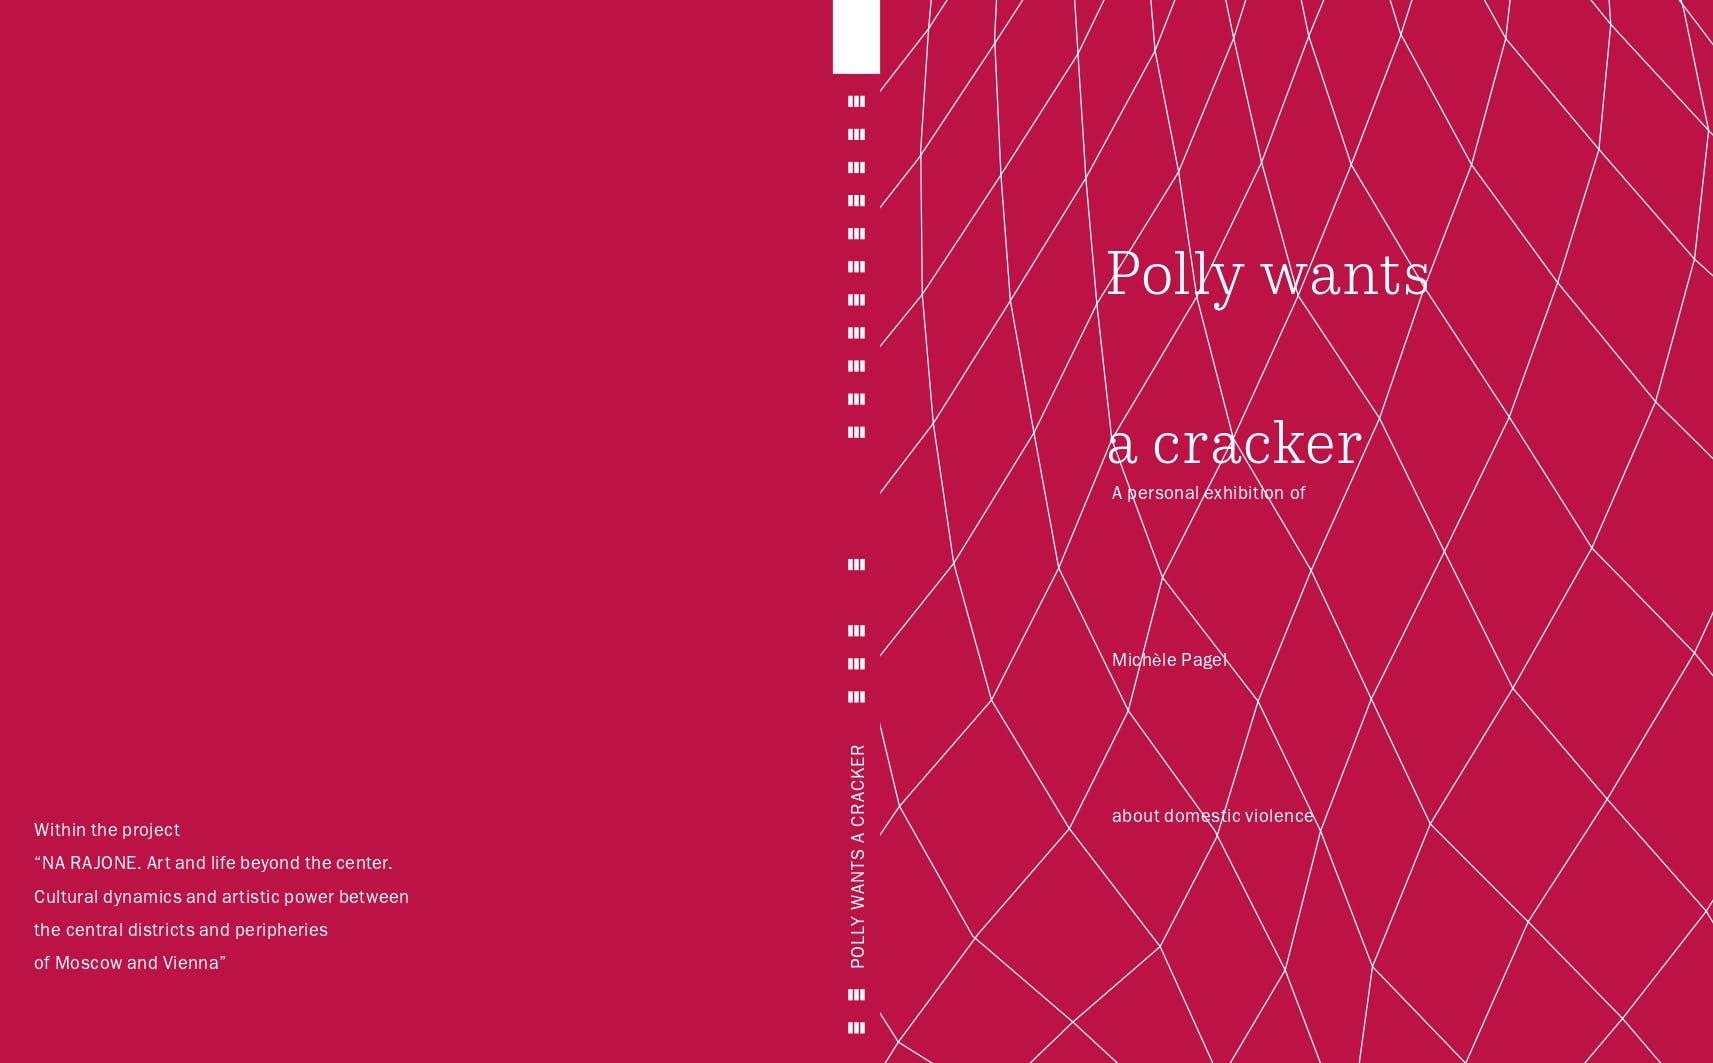 Na Rajone. Polly wants a cracker. A personal exhibition of Michèle Pagel about domestic violence